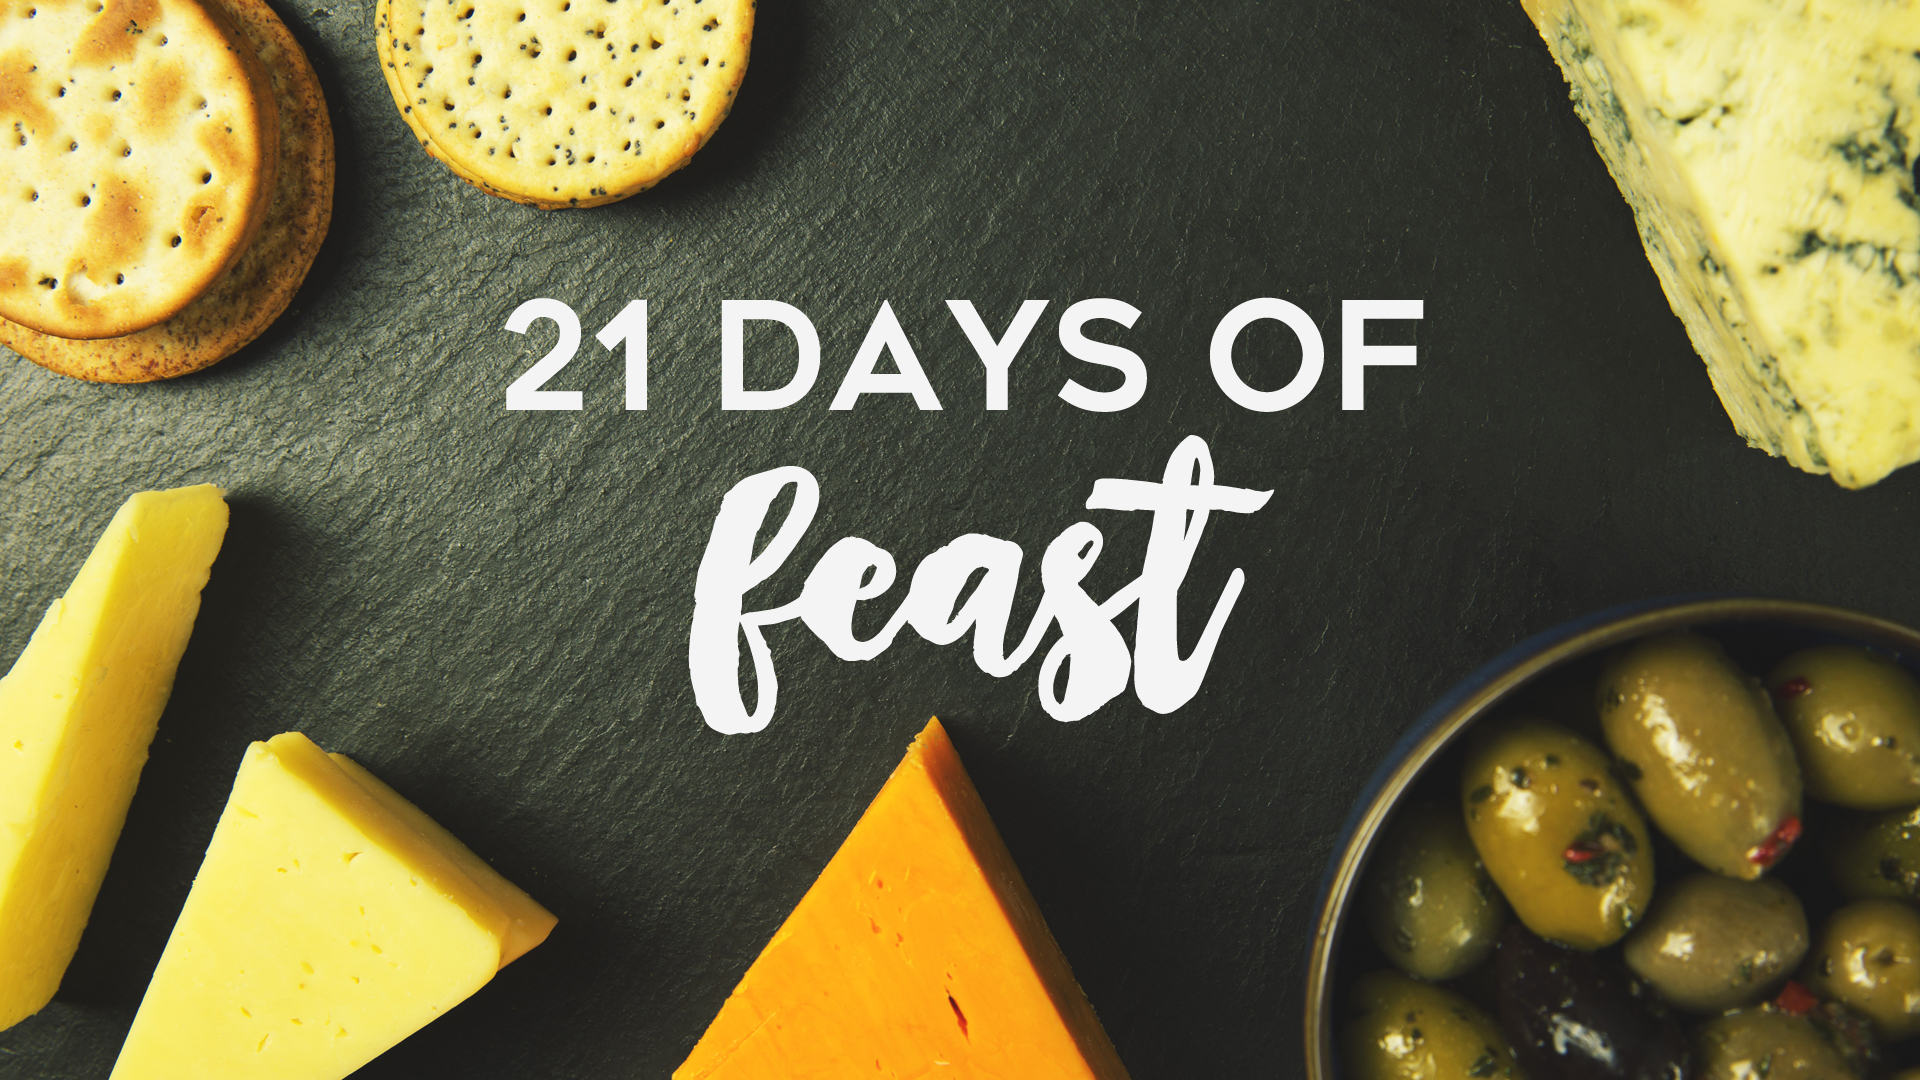 21 Days of Feast: Vision Sunday